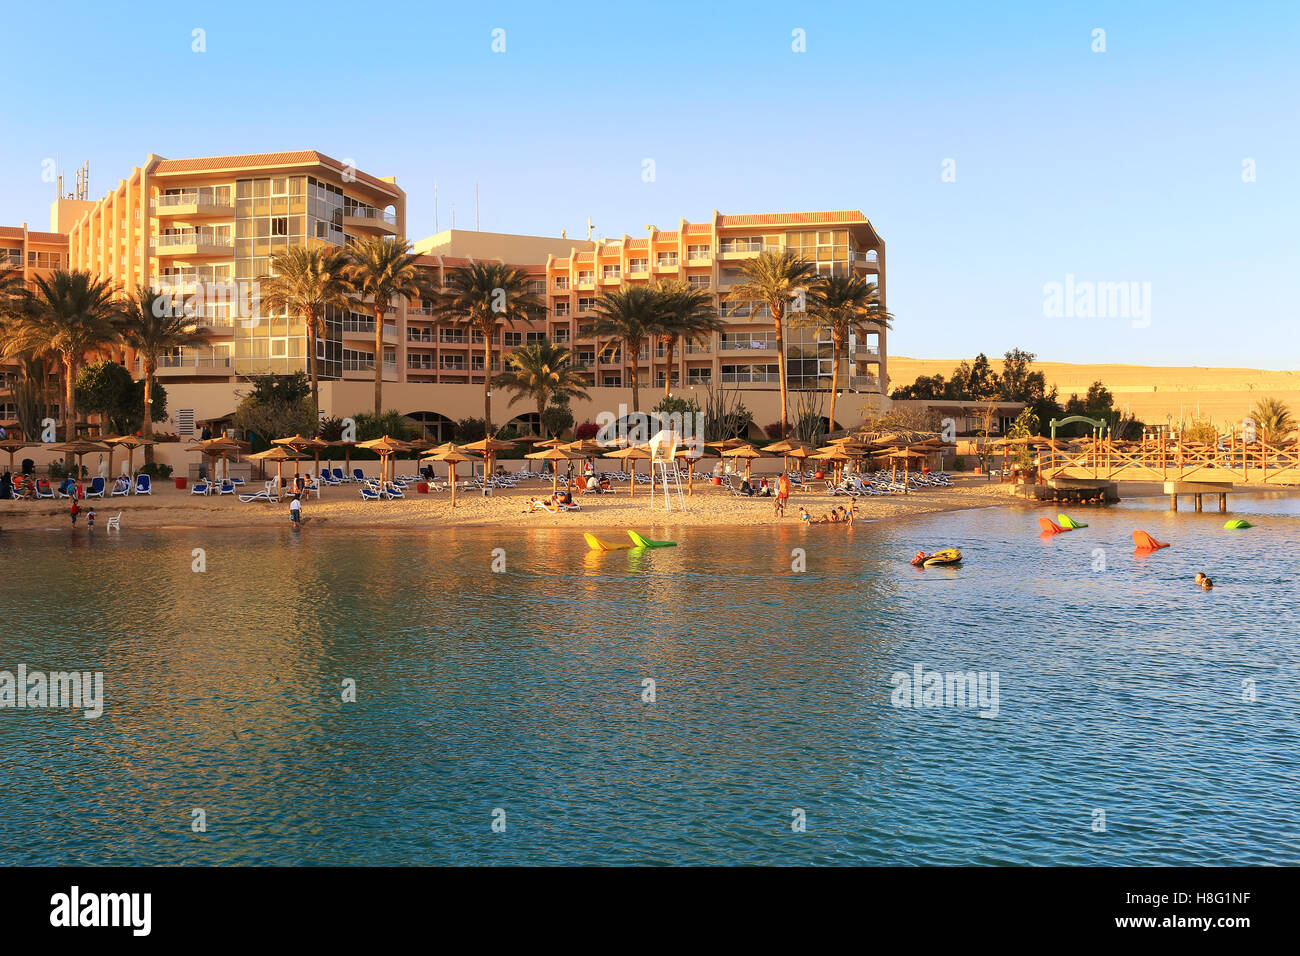 People enjoying the beach area with sun shades and lounging chairs at a resort on the Red Sea in Hurghada, Egypt Stock Photo